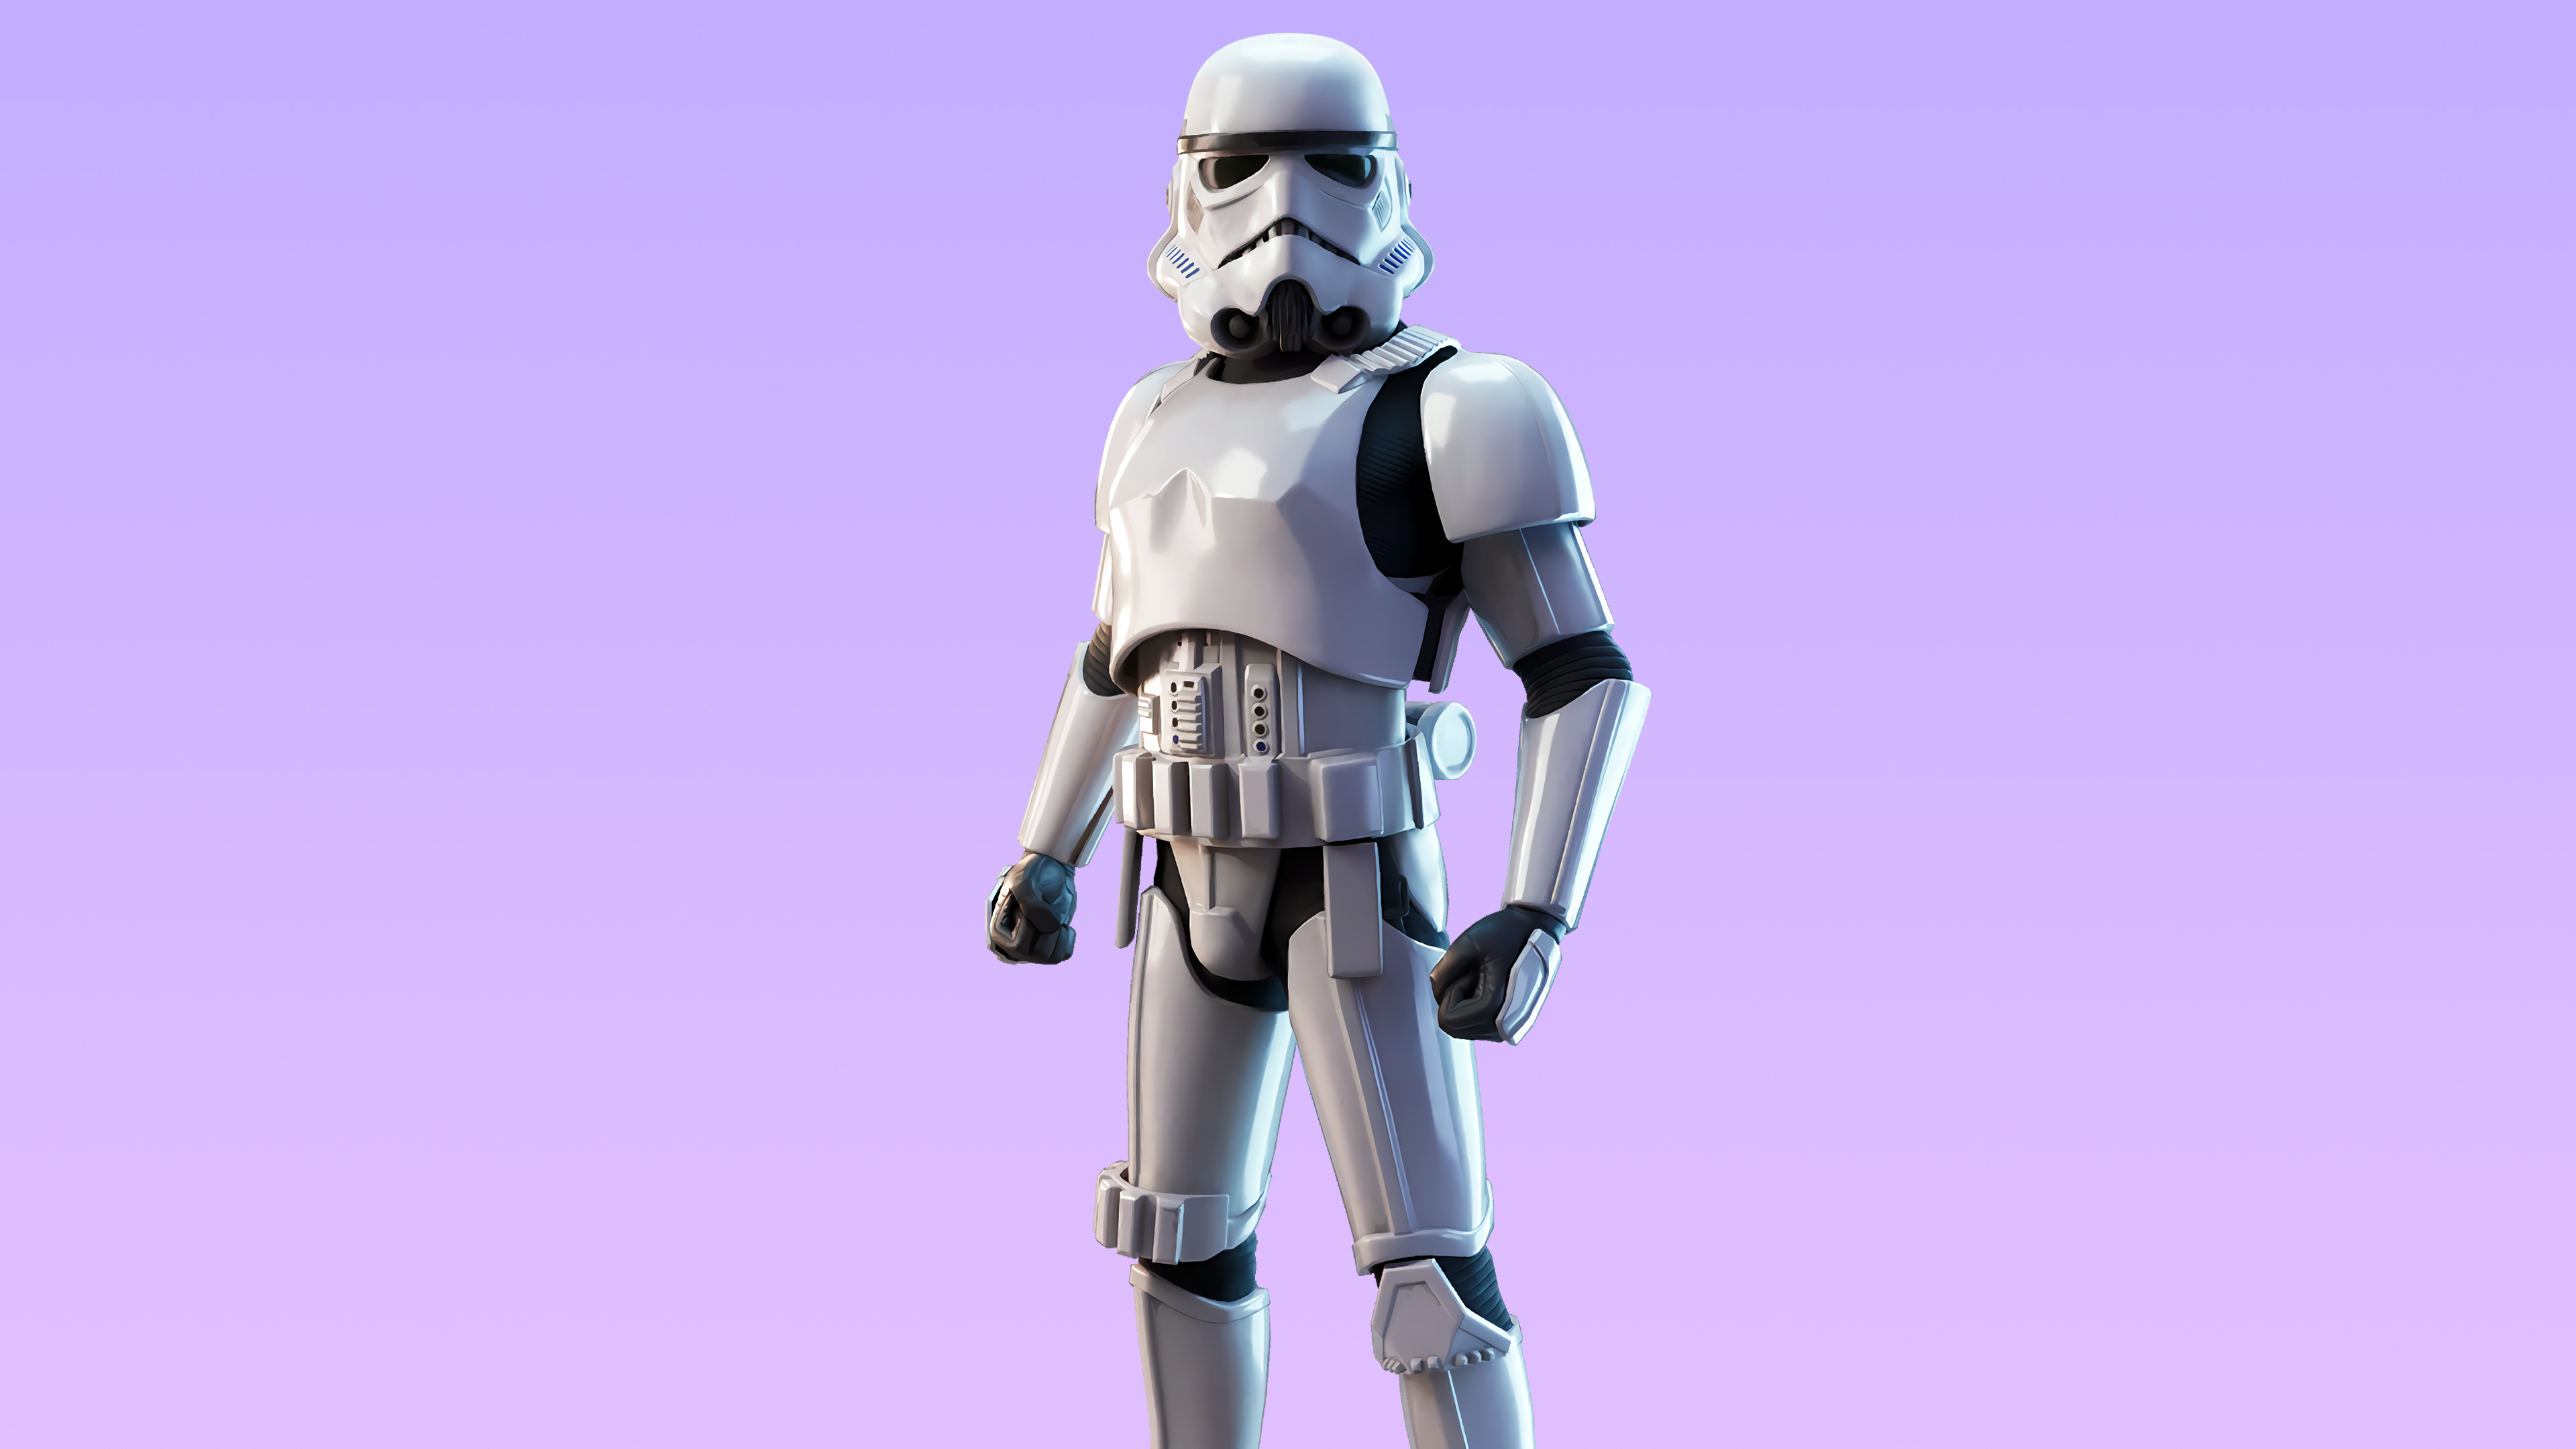 19x1080 Fortnite Imperial Stormtrooper 1080p Laptop Full Hd Wallpaper Hd Games 4k Wallpapers Images Photos And Background Wallpapers Den